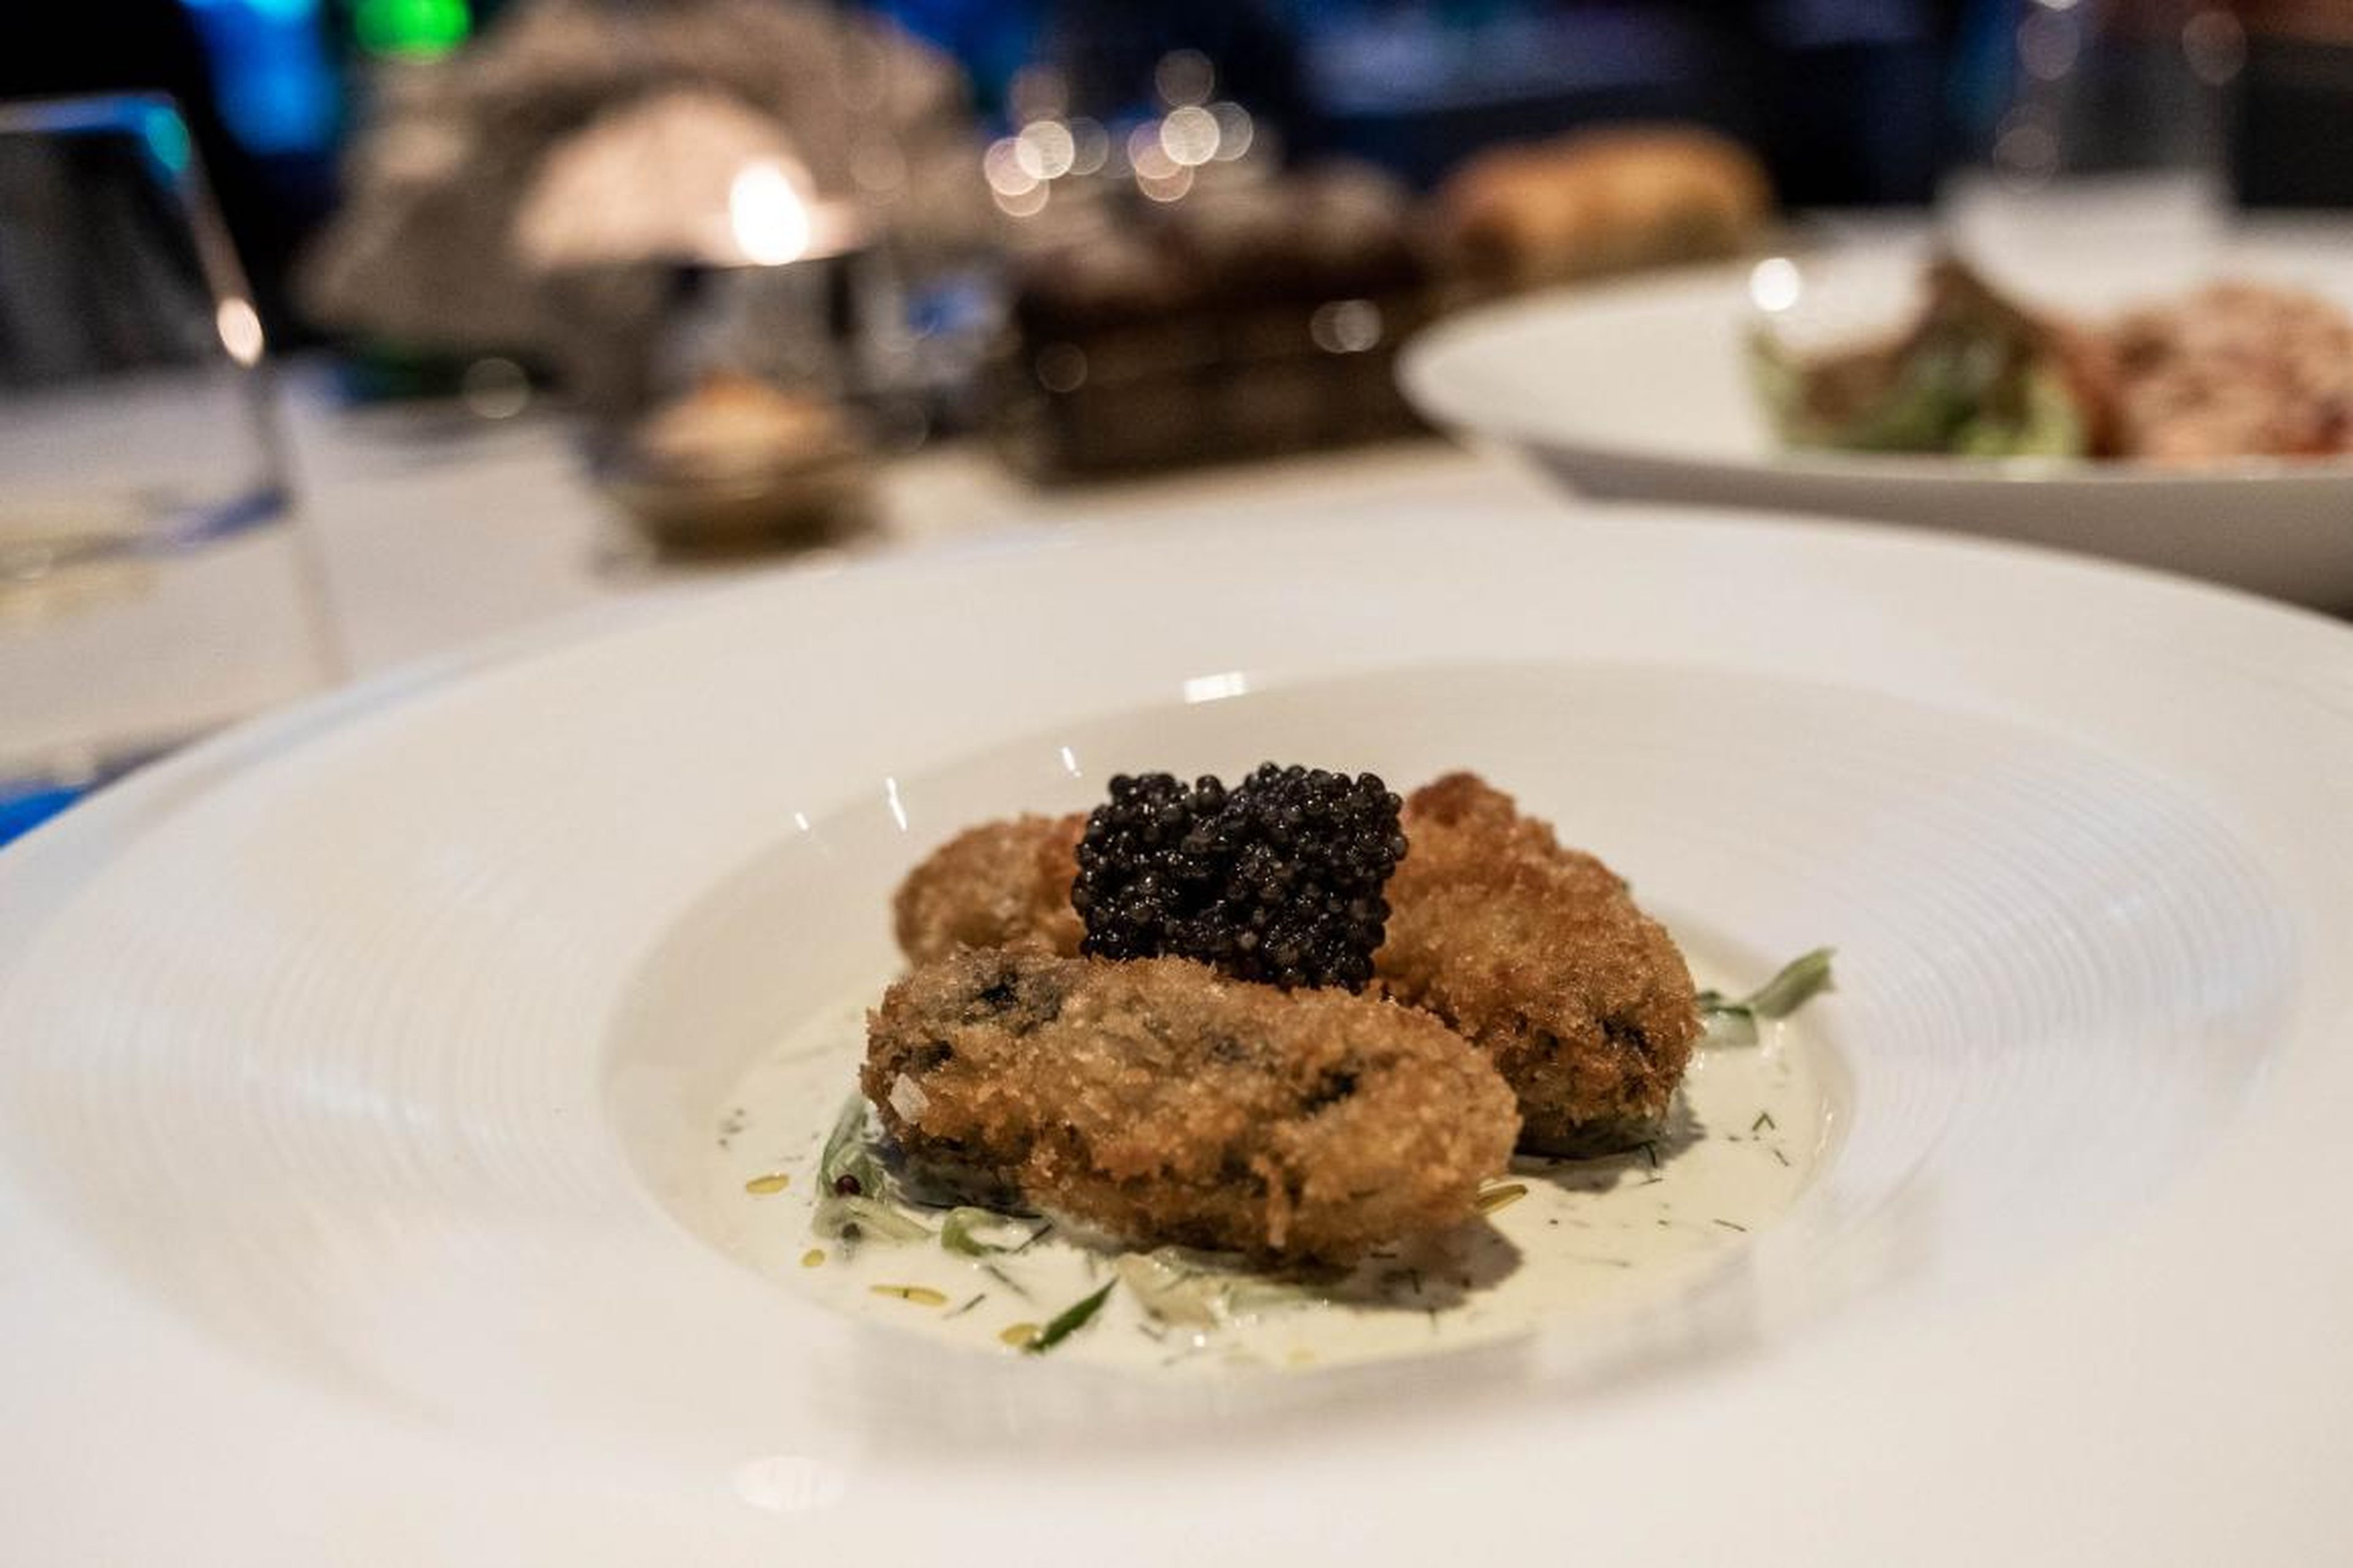 While Brunt described Outlaw's "pared-down" approach as intact at Al Mahara, the dishes I encountered, while delicious, were often as over-the-top as a golden elevator. For example, the crispy oysters (260 AED, or $70) were not